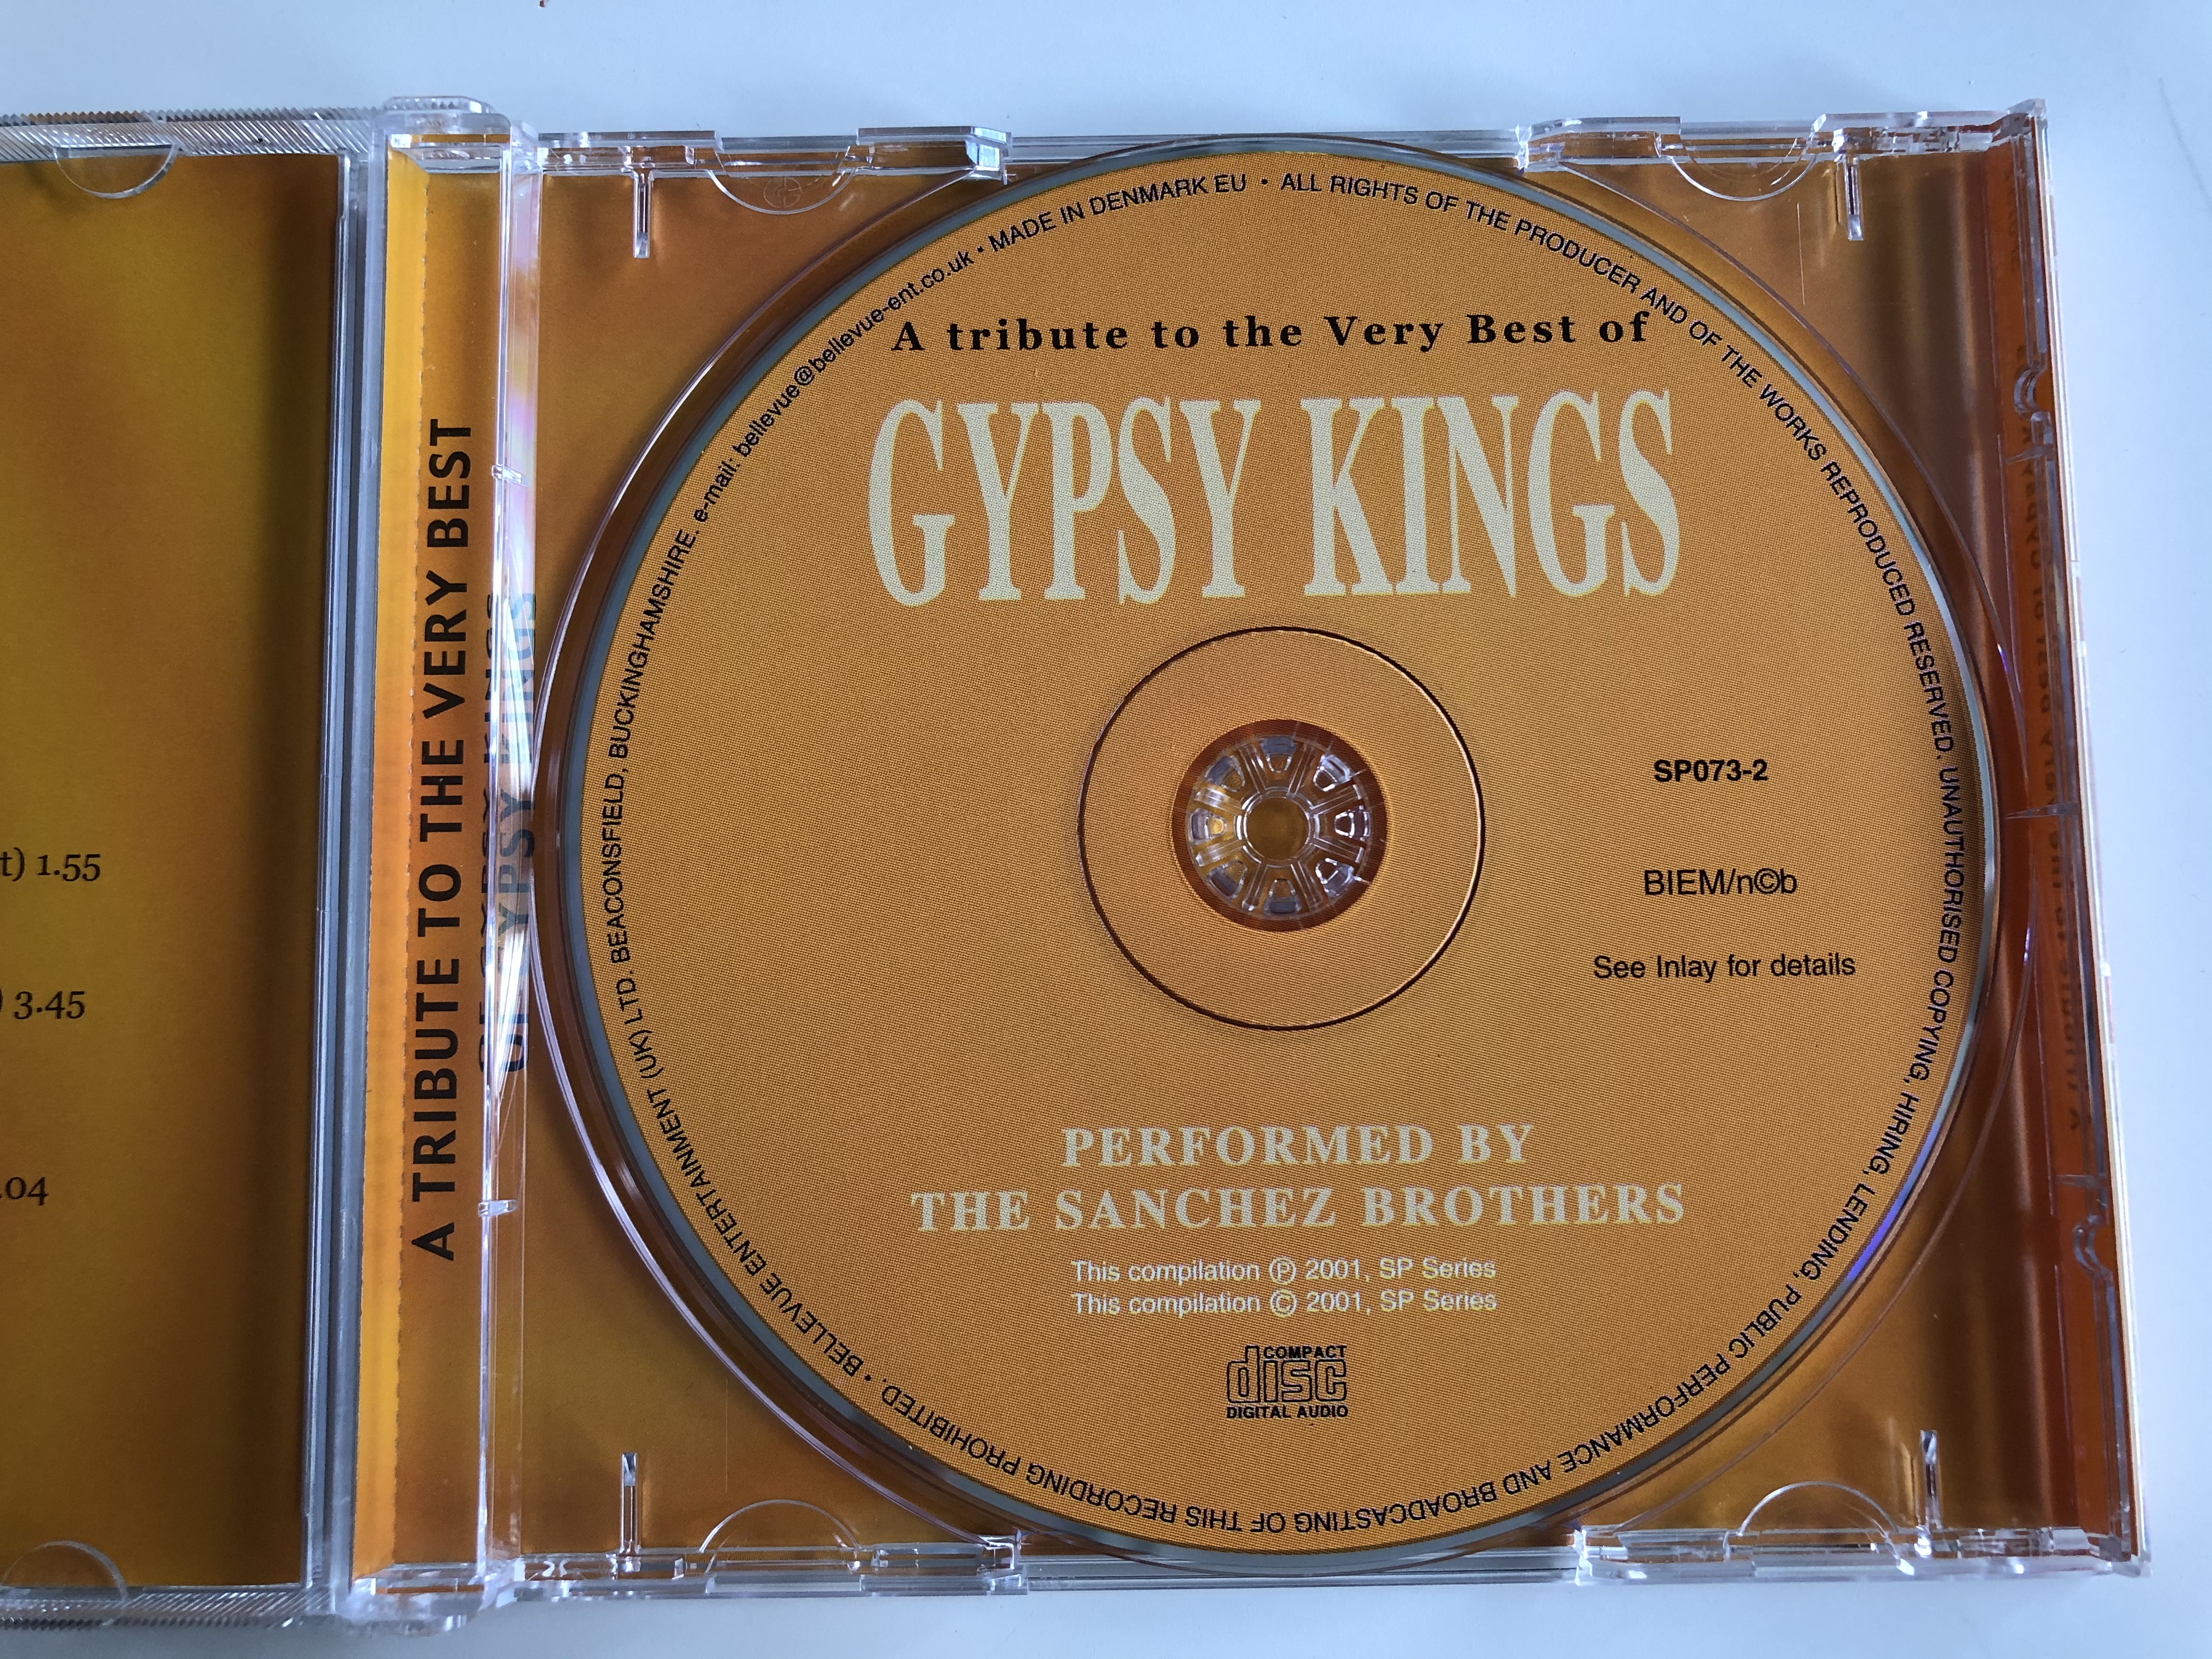 a-tribute-to-the-very-best-of-gypsy-kings-performed-by-the-sanchez-brothers-featuring....-amor-de-mis-amores-oh-eh-oh-eh-hotel-california-bamboleo-sp-series-audio-cd-2001-sp073-2-3-.jpg